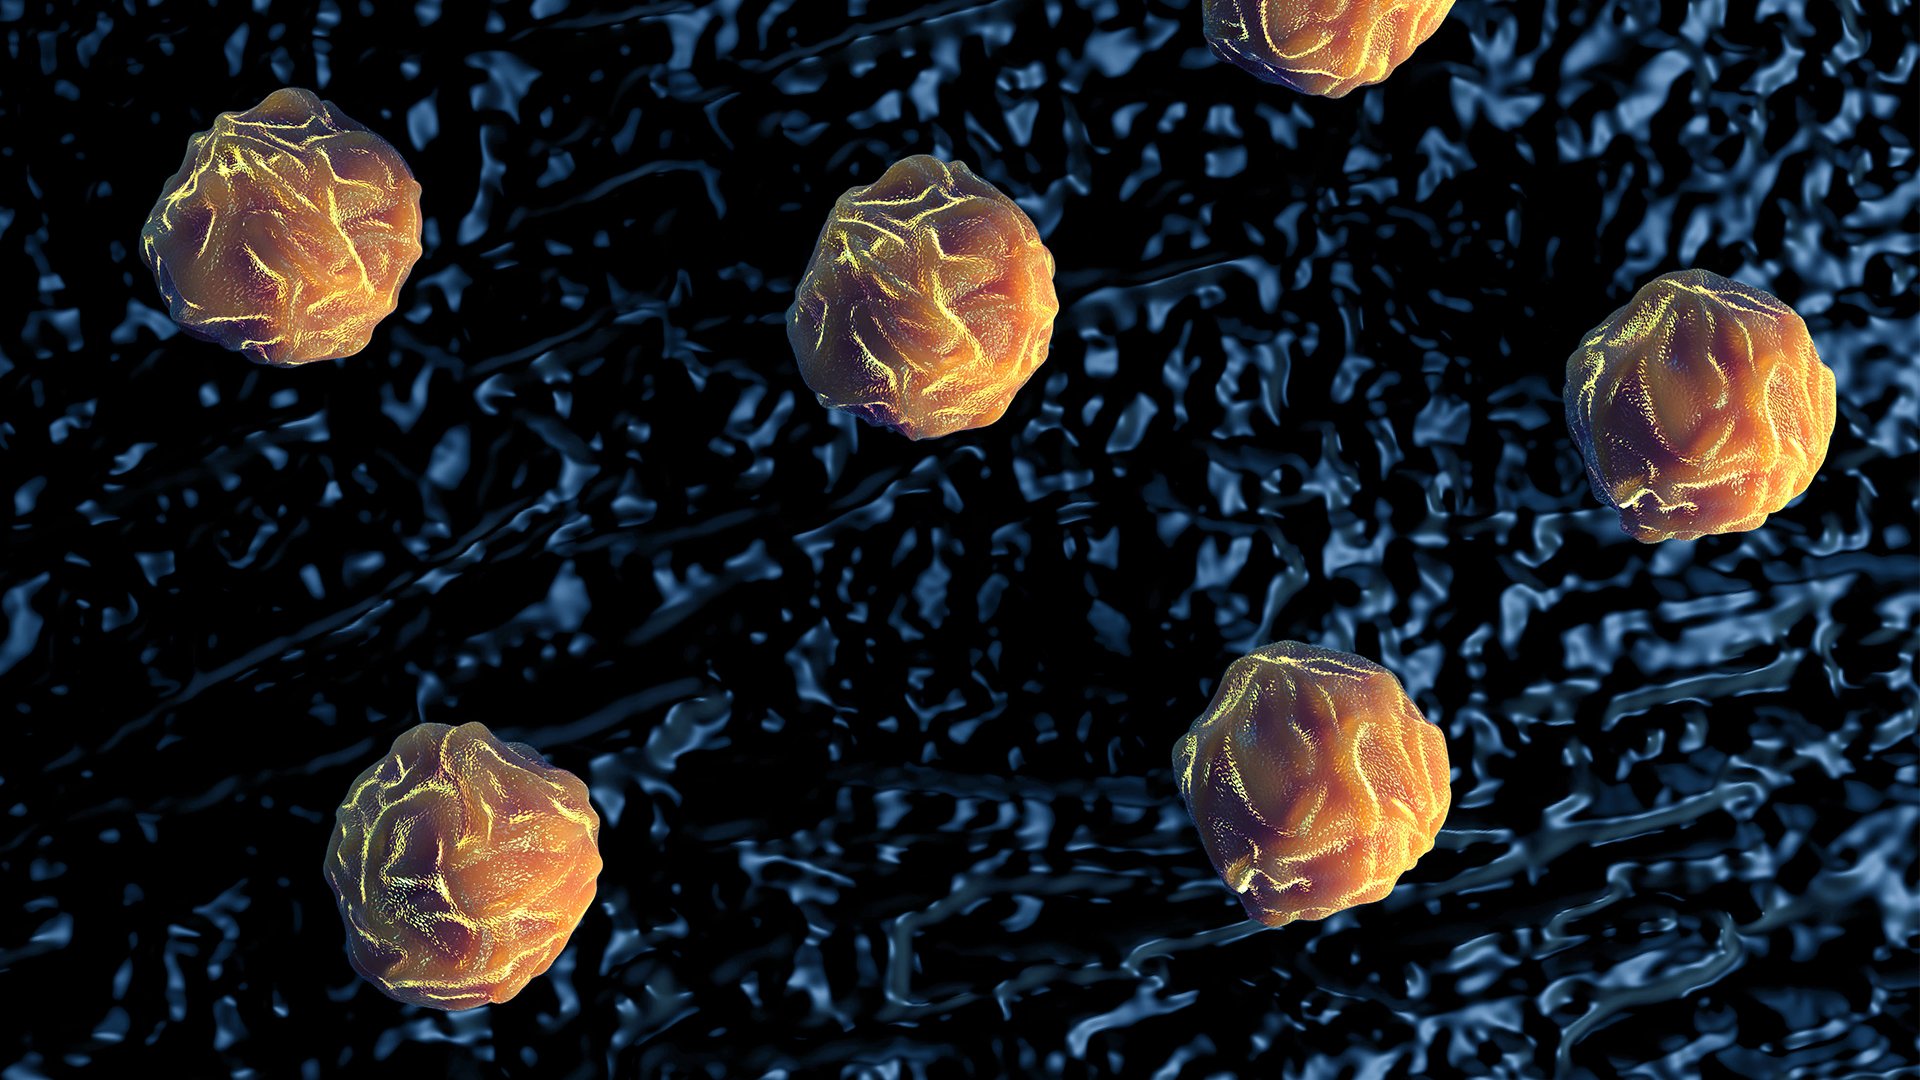 Orange spheres float on top of a textured blue background, which represents what bone marrow stem cells.